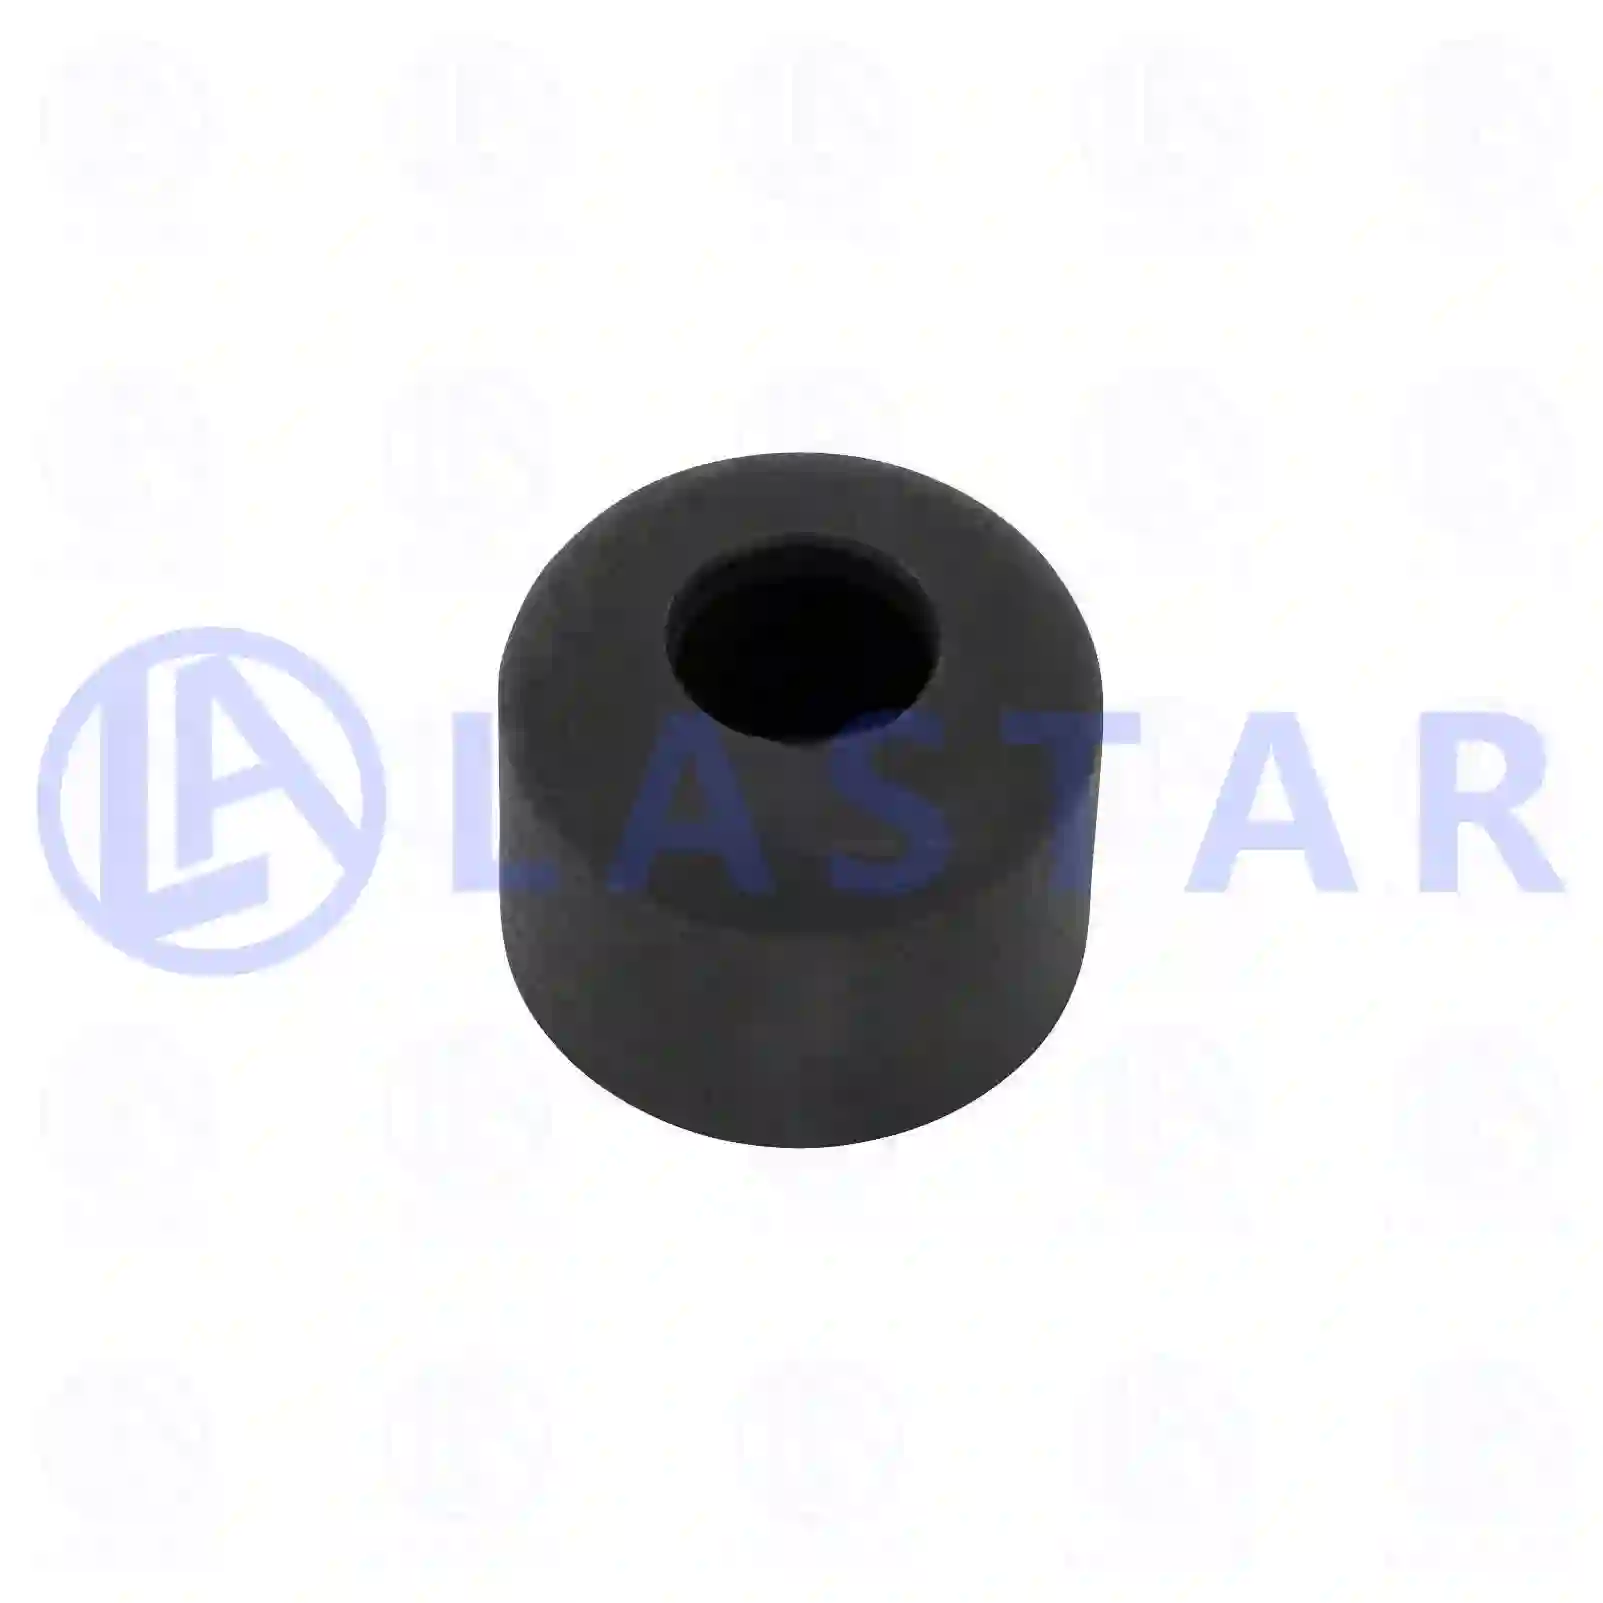 Clamping piece, 77701568, 51917010386, 4031420112, 4031420212, 4231420212 ||  77701568 Lastar Spare Part | Truck Spare Parts, Auotomotive Spare Parts Clamping piece, 77701568, 51917010386, 4031420112, 4031420212, 4231420212 ||  77701568 Lastar Spare Part | Truck Spare Parts, Auotomotive Spare Parts